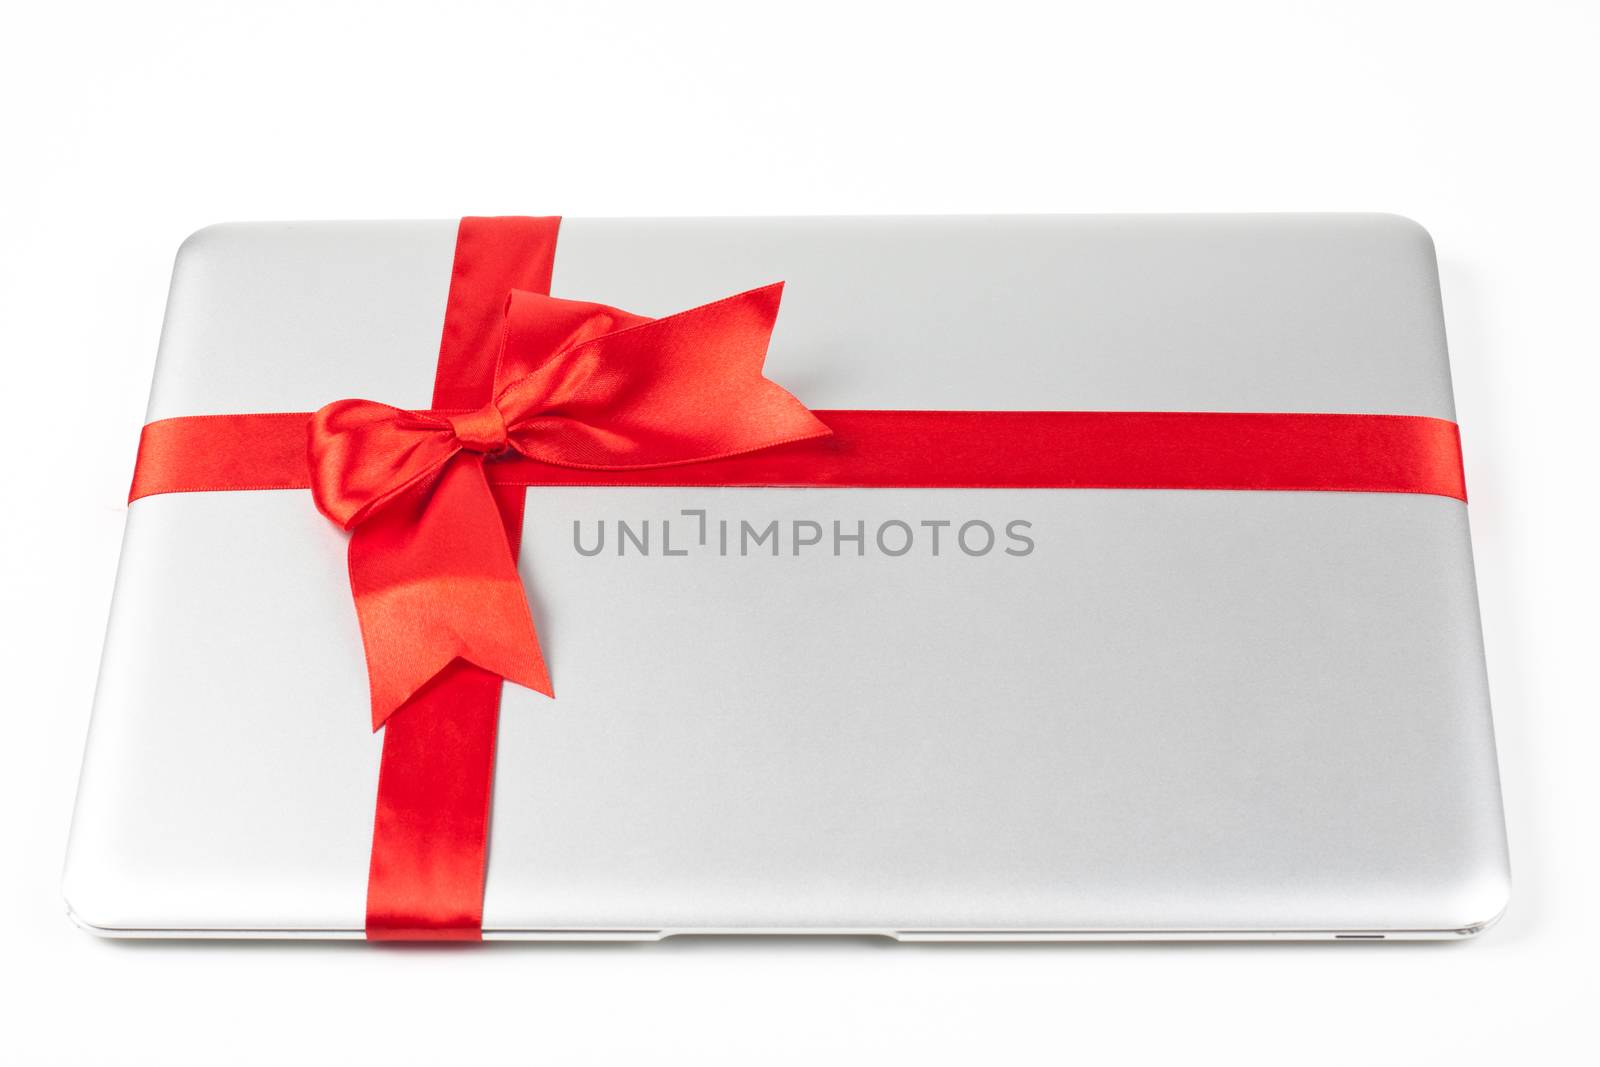 closed silver laptop gift with red ribbon isolated on white background